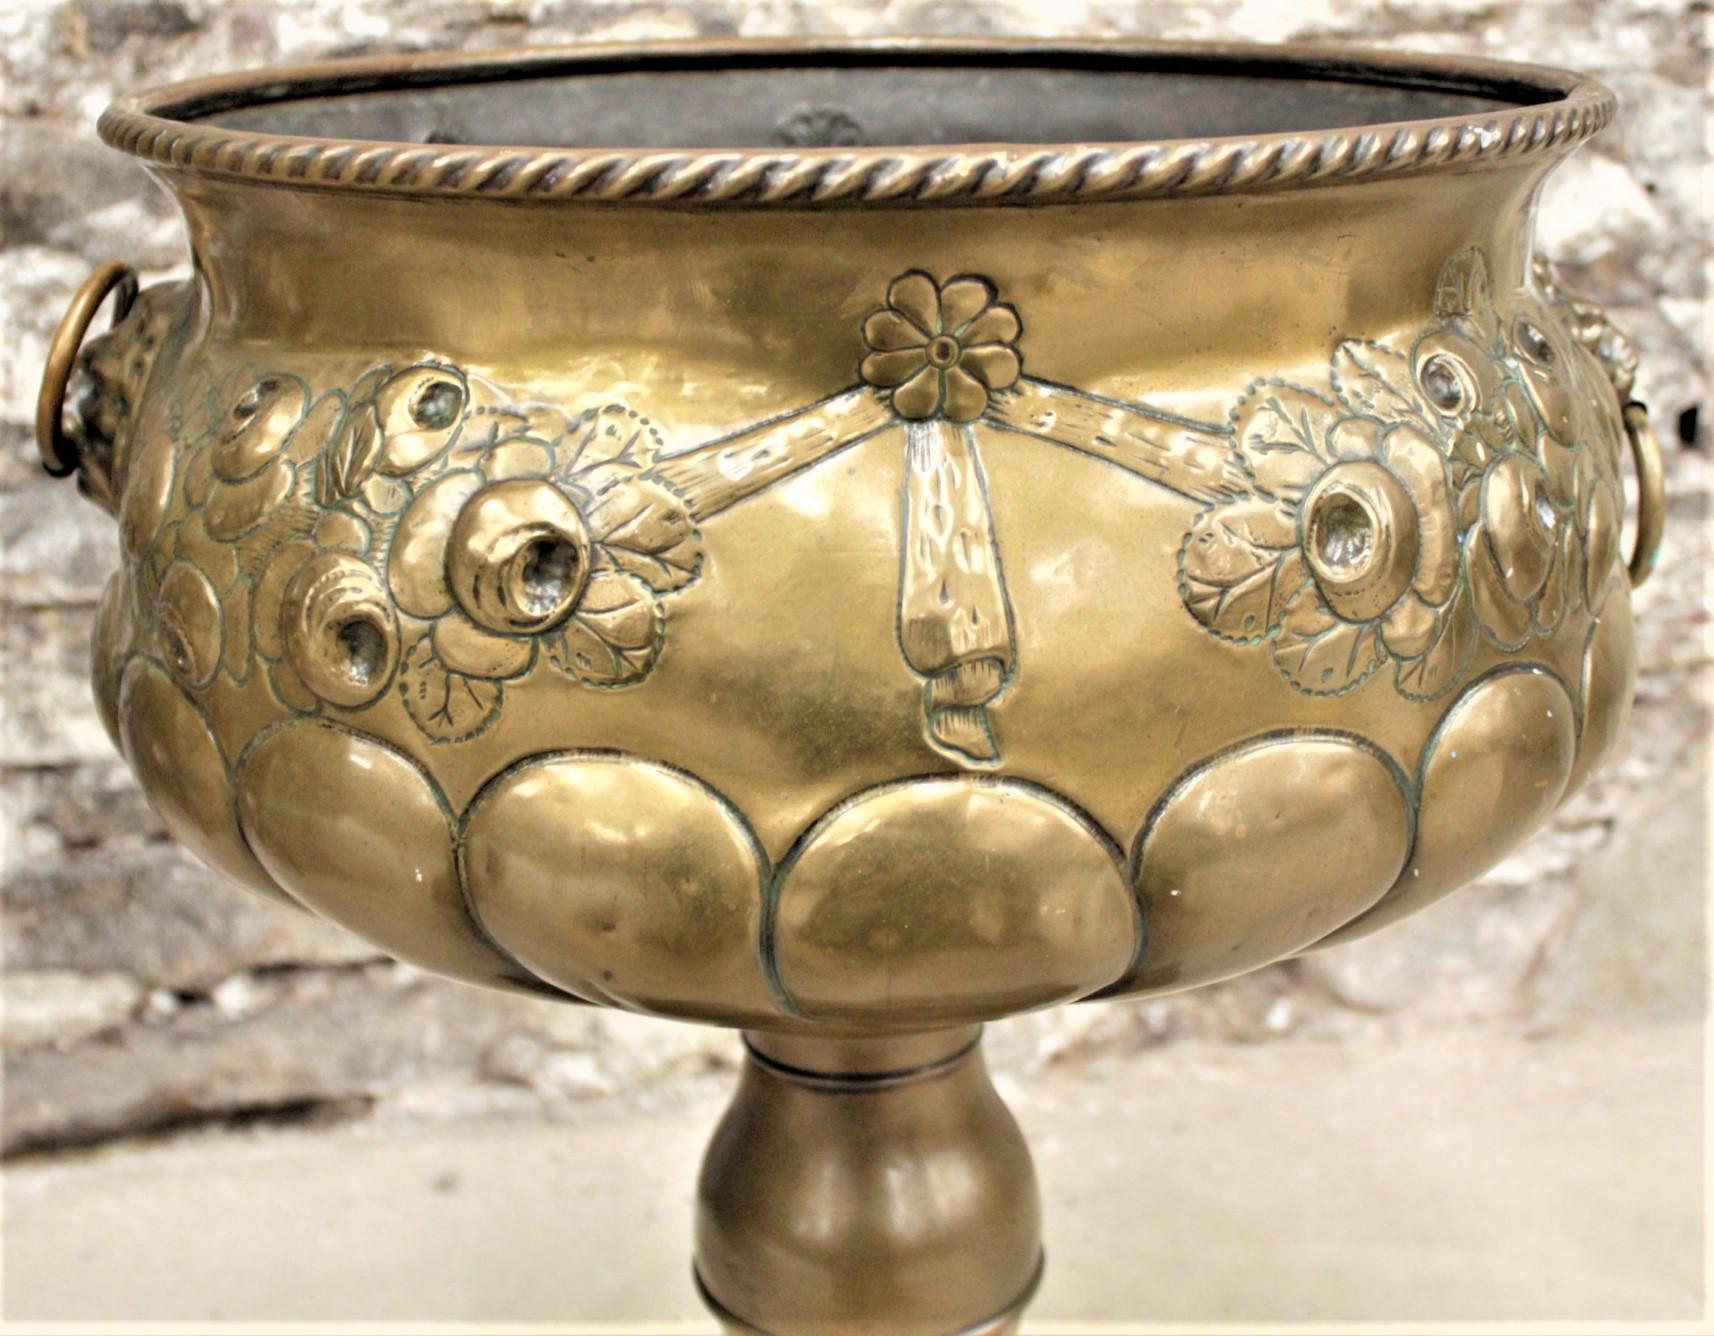 Antique Brass Pedestal Planter with Ornate Floral Decoration In Good Condition For Sale In Hamilton, Ontario